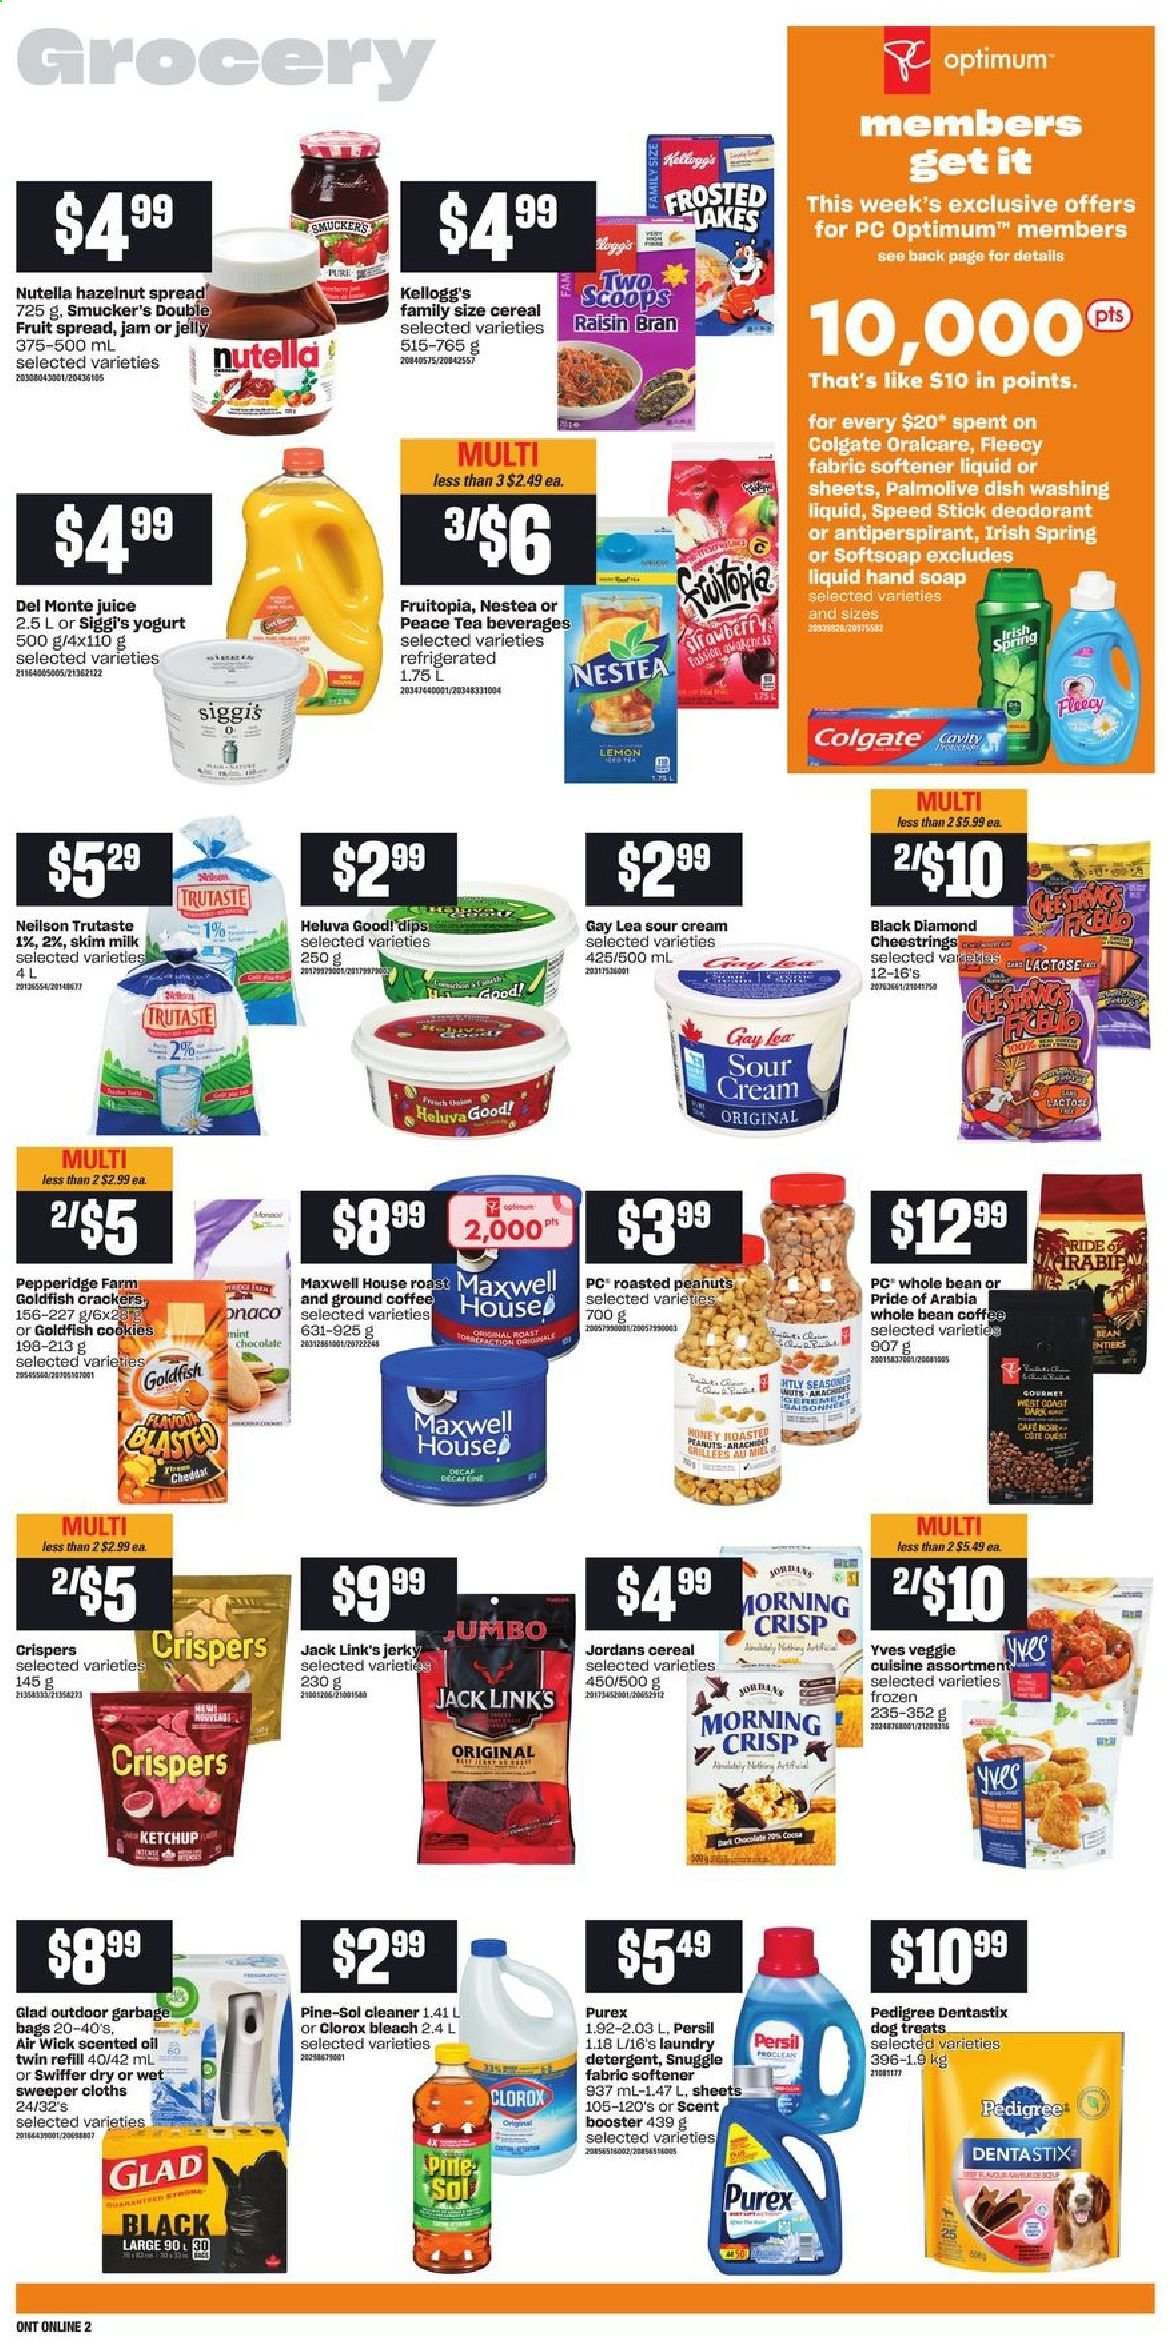 thumbnail - Loblaws Flyer - May 06, 2021 - May 12, 2021 - Sales products - jerky, string cheese, yoghurt, milk, sour cream, cookies, chocolate, jelly, crackers, Kellogg's, Goldfish, Jack Link's, cereals, Raisin Bran, oil, fruit jam, hazelnut spread, roasted peanuts, peanuts, juice, Maxwell House, tea, coffee, ground coffee, cleaner, bleach, Clorox, Pine-Sol, Swiffer, Snuggle, Persil, fabric softener, laundry detergent, Purex, dishwashing liquid, Softsoap, hand soap, Palmolive, soap, anti-perspirant, Speed Stick, bag, Dentastix, Optimum, Pedigree, Nutella, deodorant. Page 6.